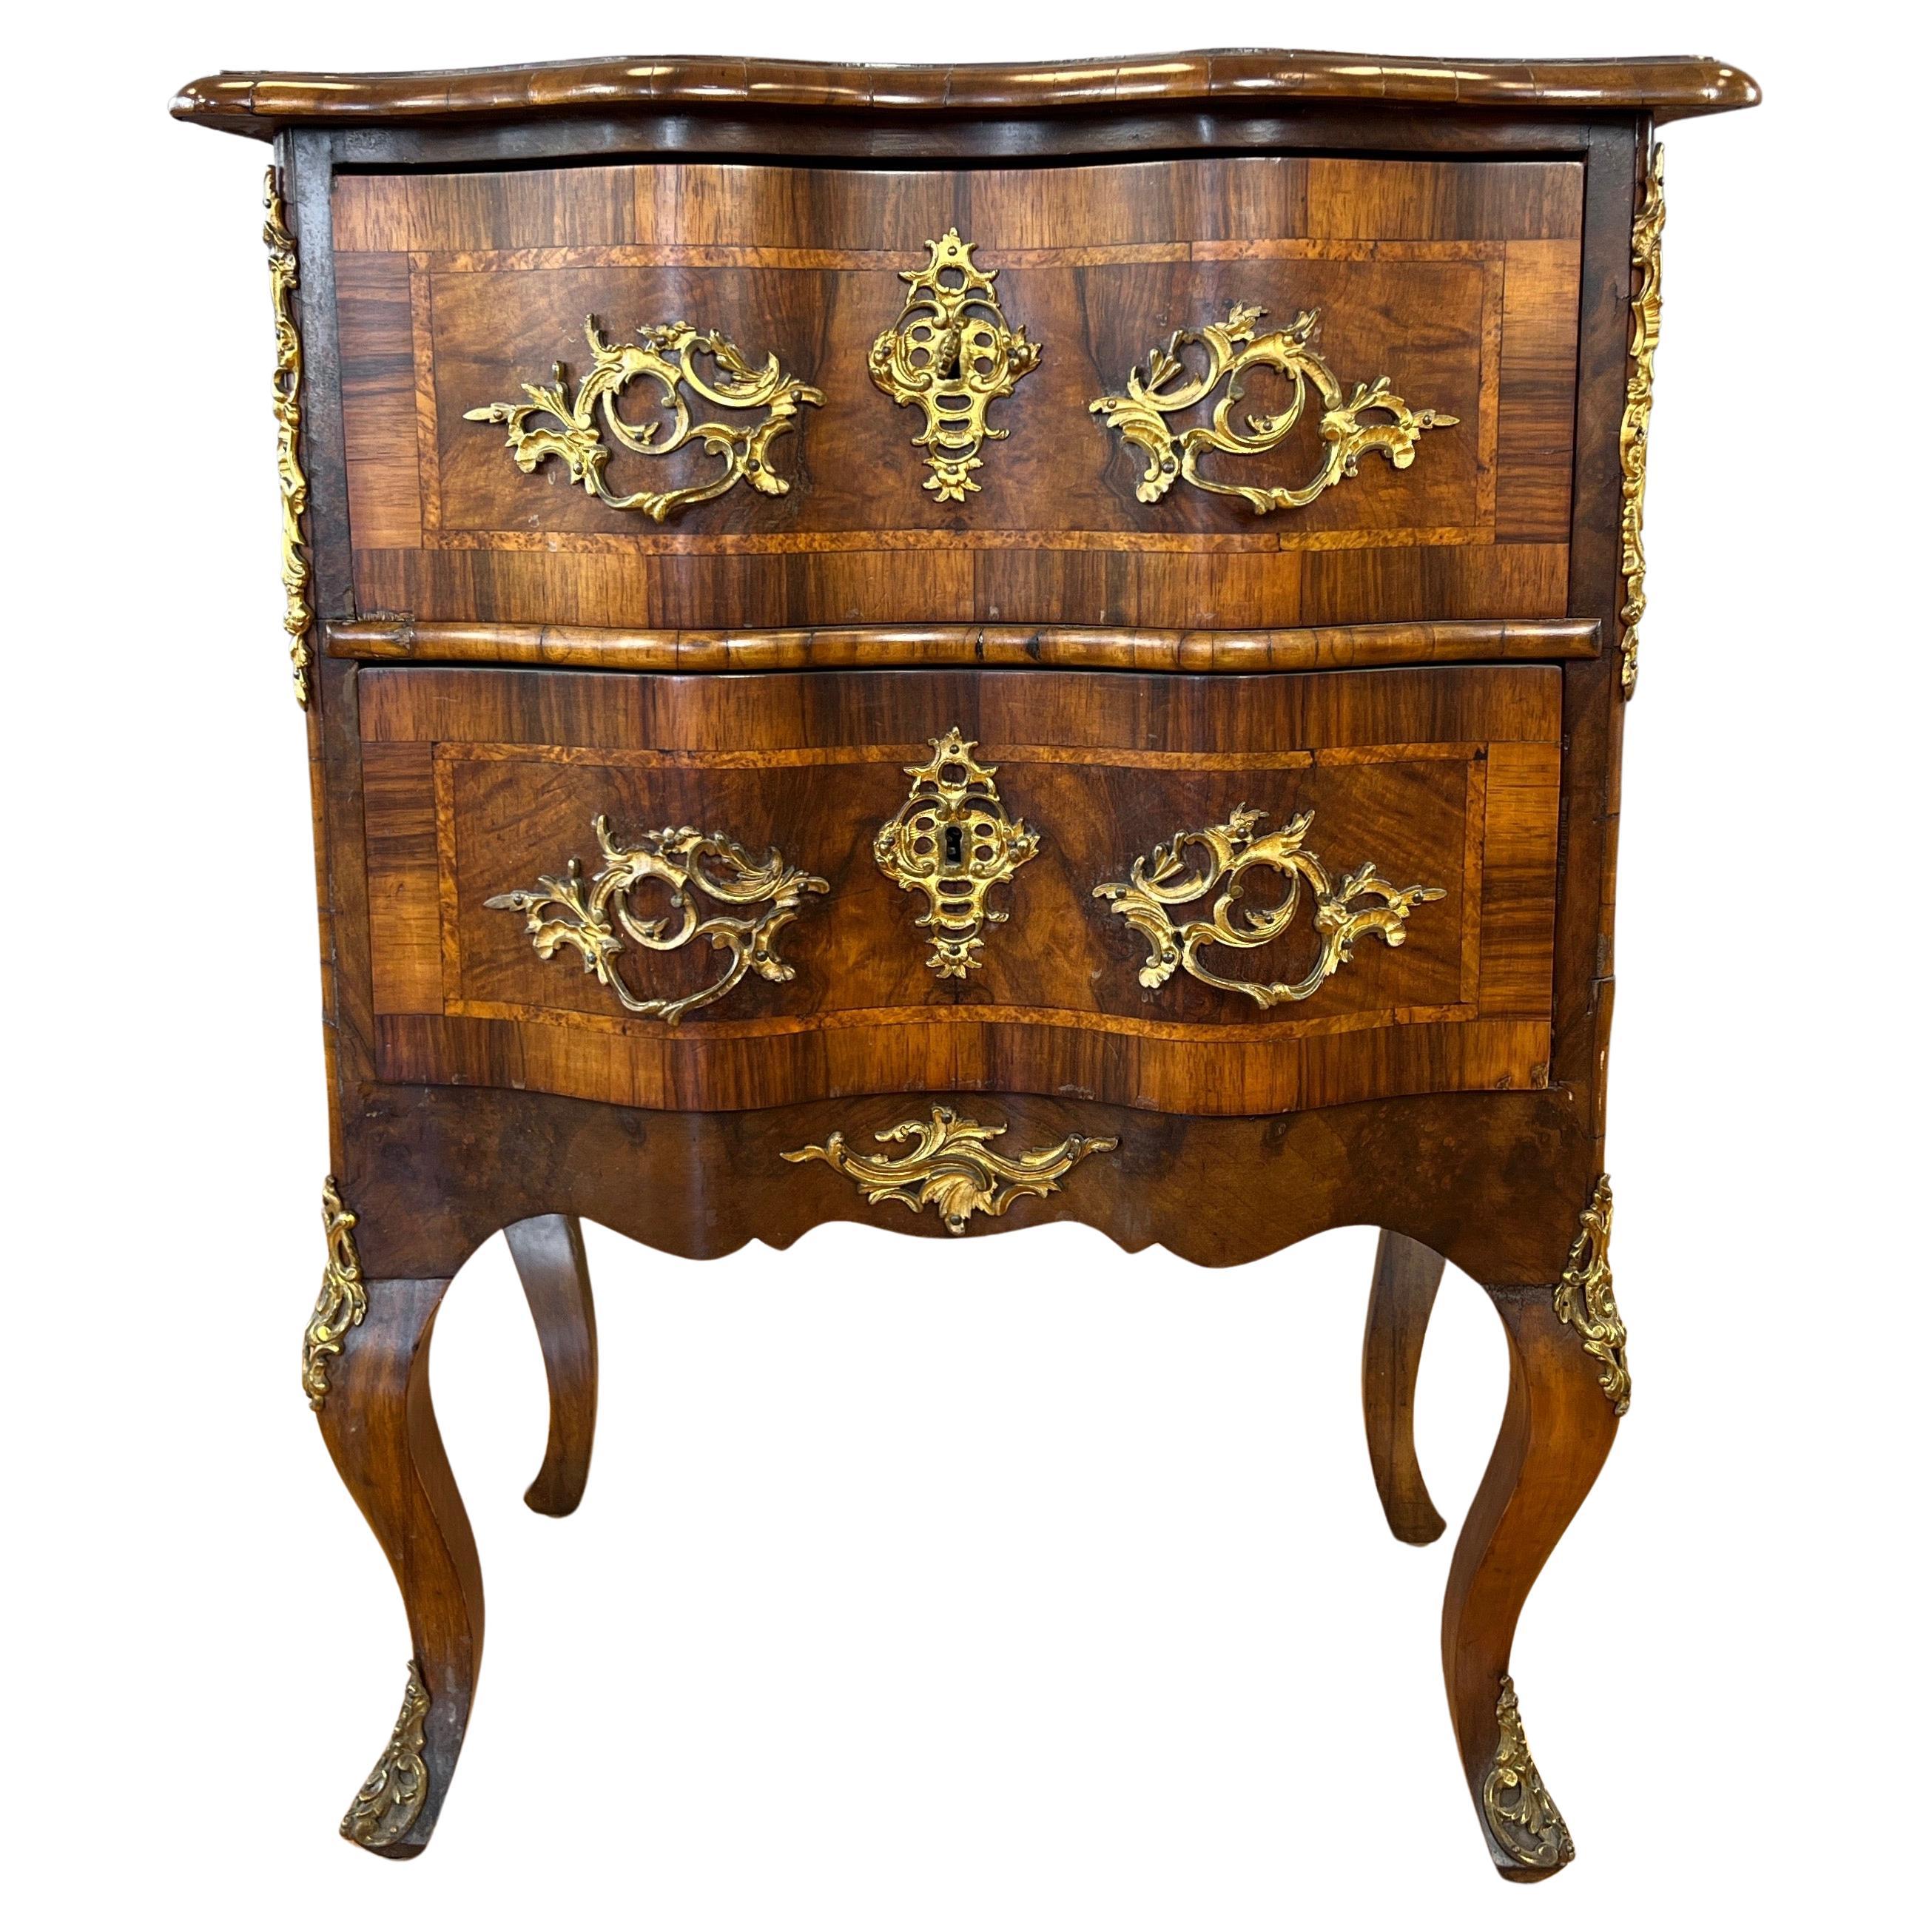 French Louis XV Walnut Marquetry and Ormolu Two-Drawer Commode, Early 19th C.